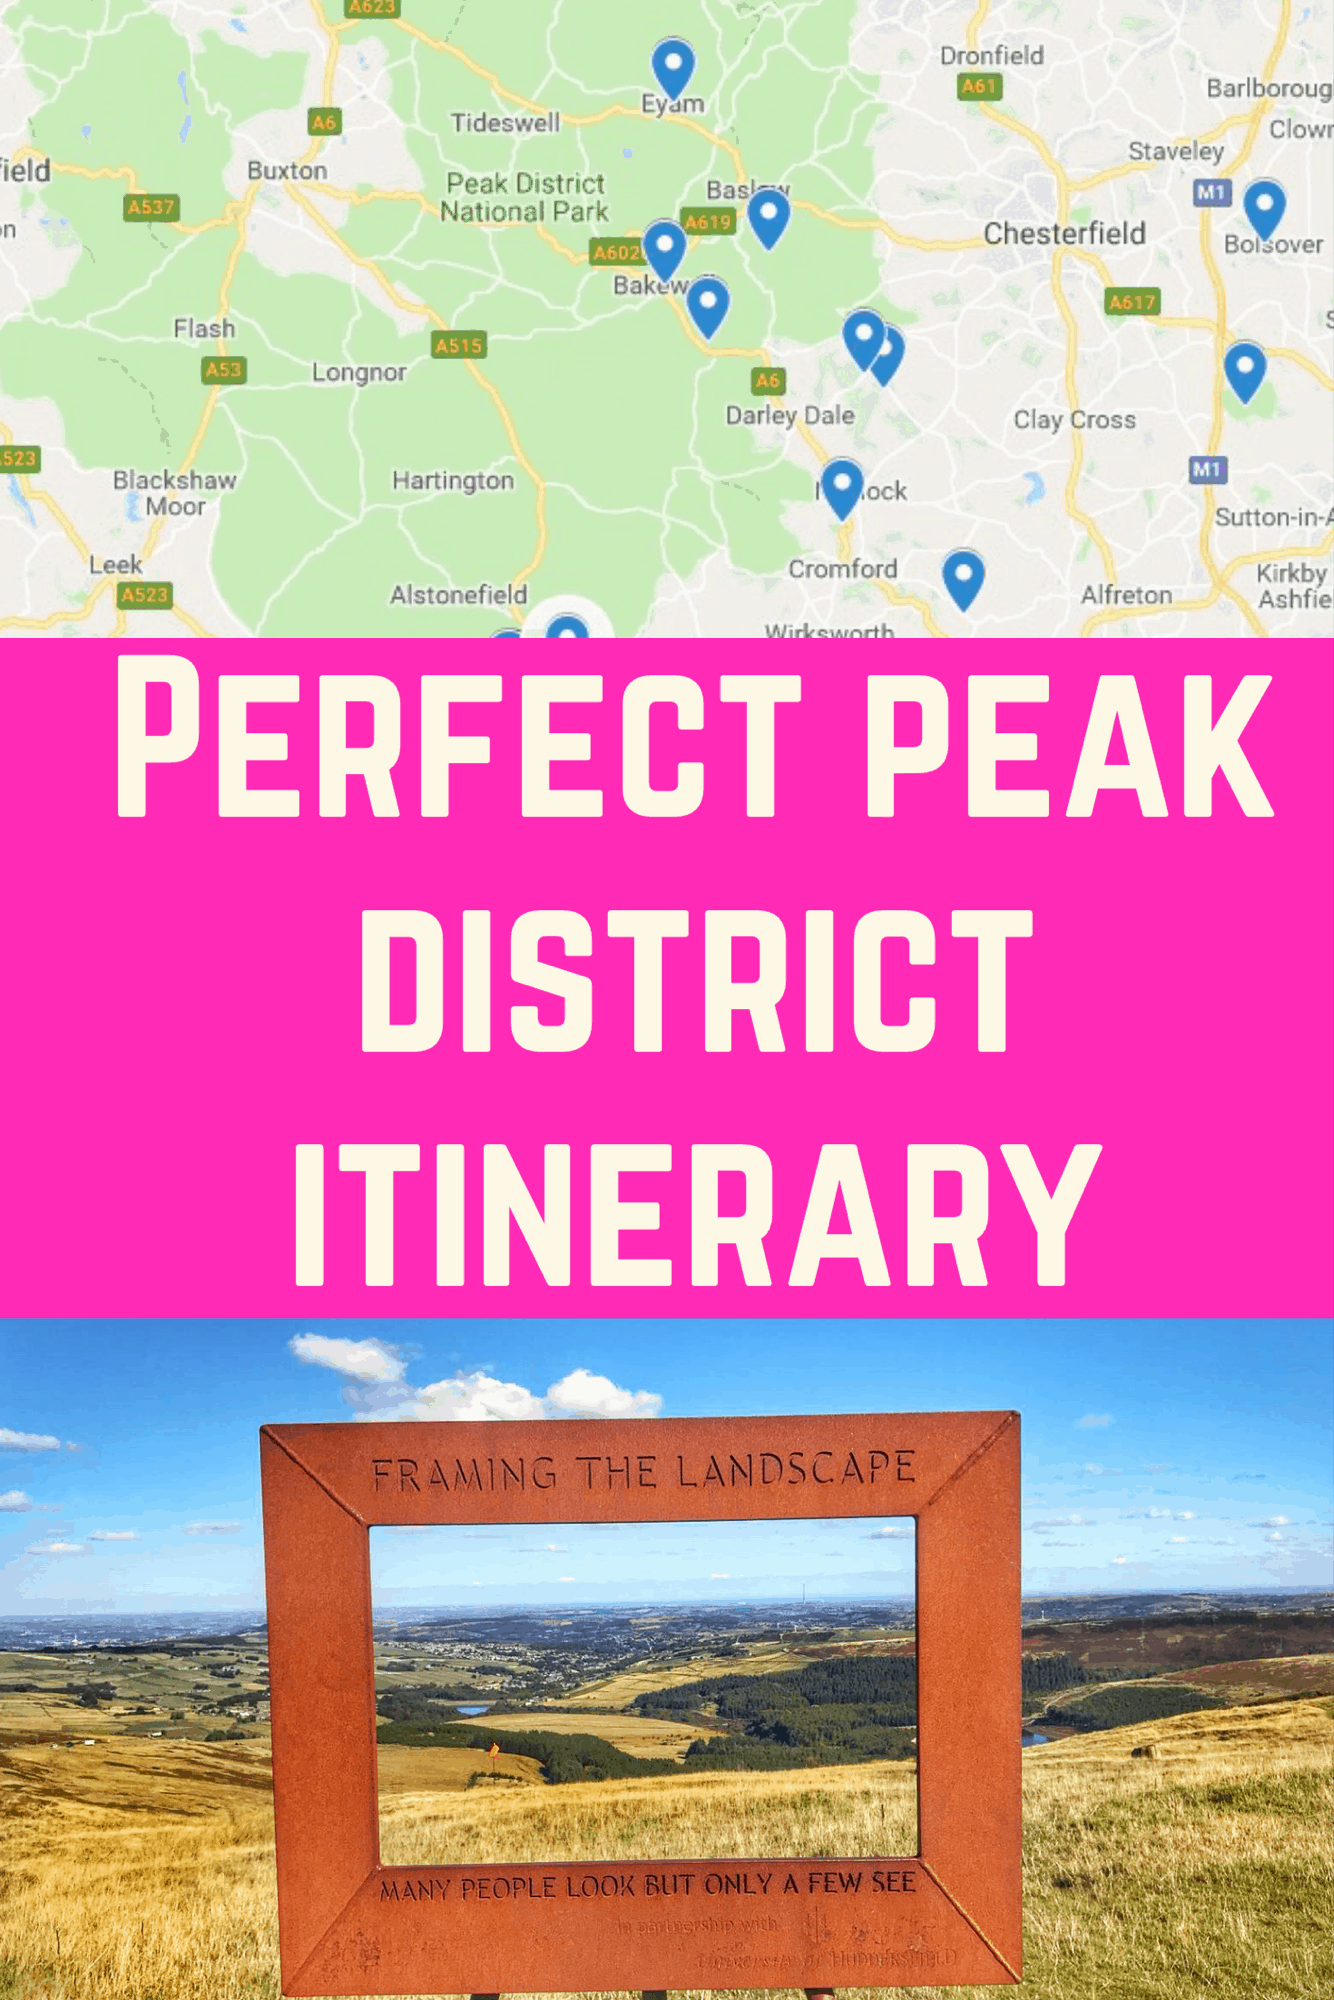 Perfect Peak District Itinerary. One Week in the Peak District. Peak District Packing List. Best Things to do in the peak district #peakdistrict #visitthepeakdistrict #peakdistrictravel #peakdistrictitinerary #ashbourne #bakewell #chatworth